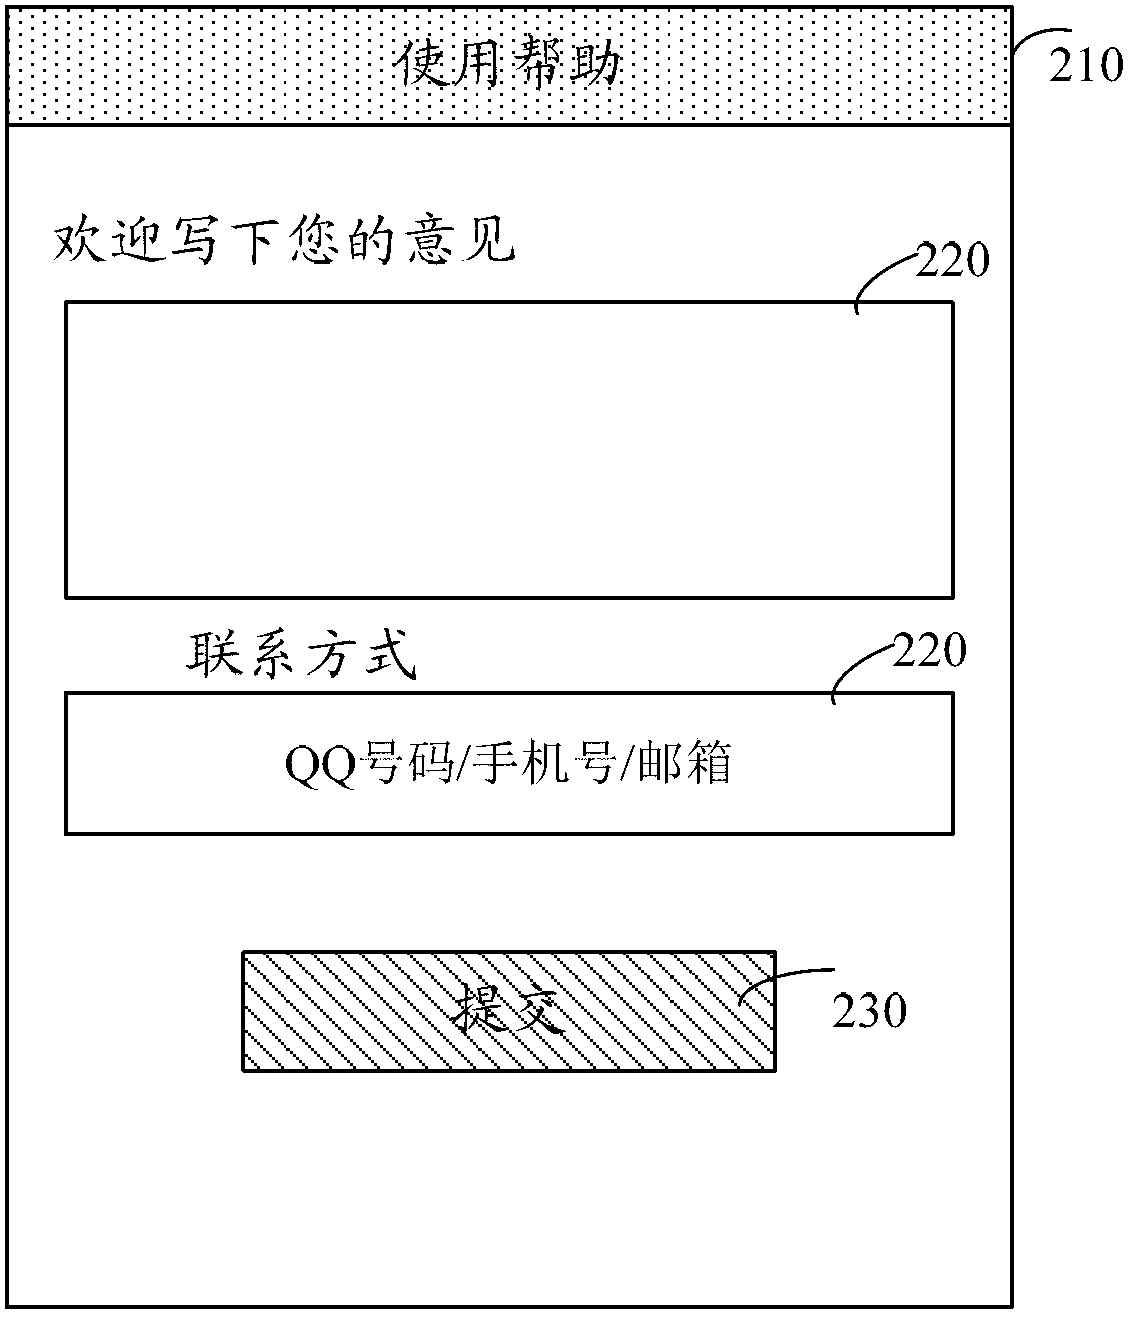 Method and system for implementing application interface in terminal